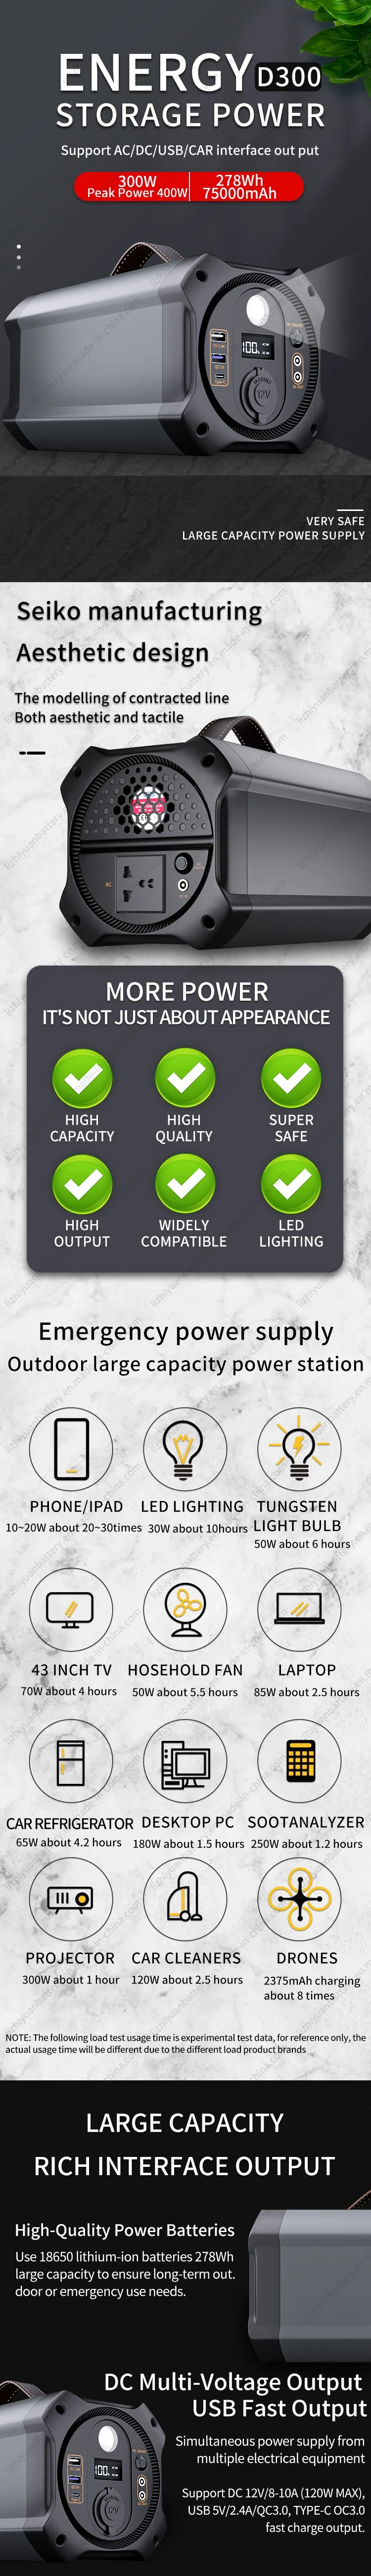 Outdoor Energy Storage Power Supply Portable Mobile Large Capacity Power Supply Emergency Vehicle-Mounted Household Power Supply 300W